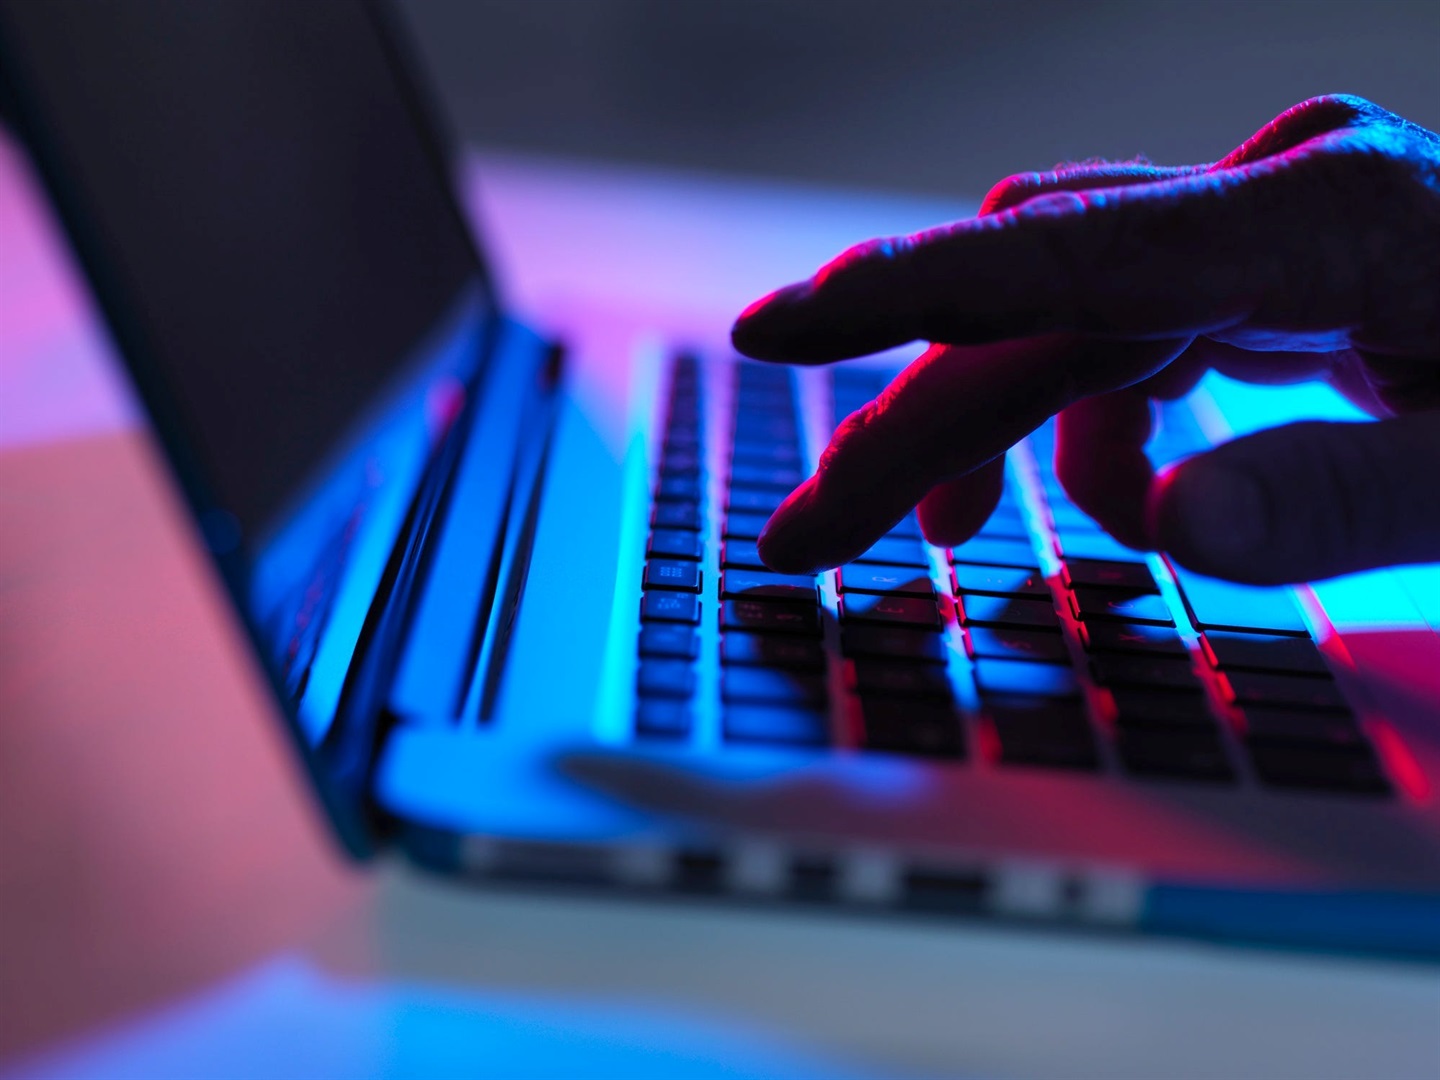 A hand rests on a laptop computer under dark lighting, implying misbehaviour. Andrew Brookes/Getty Images